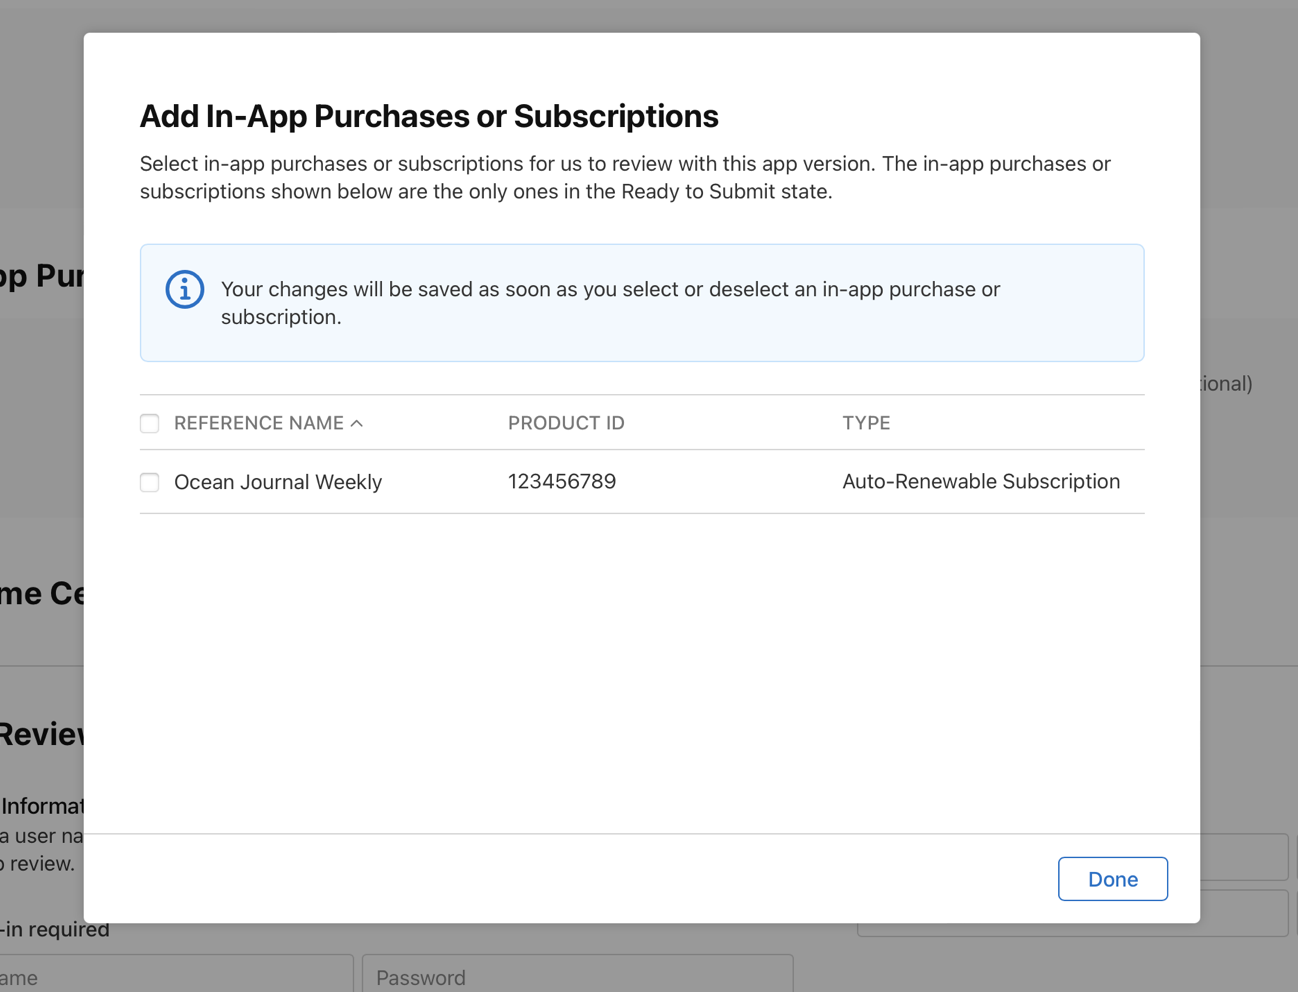 Add In-App Purchases or Subscriptions dialog. An auto-renewable subscription with a checkbox on the left side of its reference name is listed as an example. “Done” button is located on the bottom right.